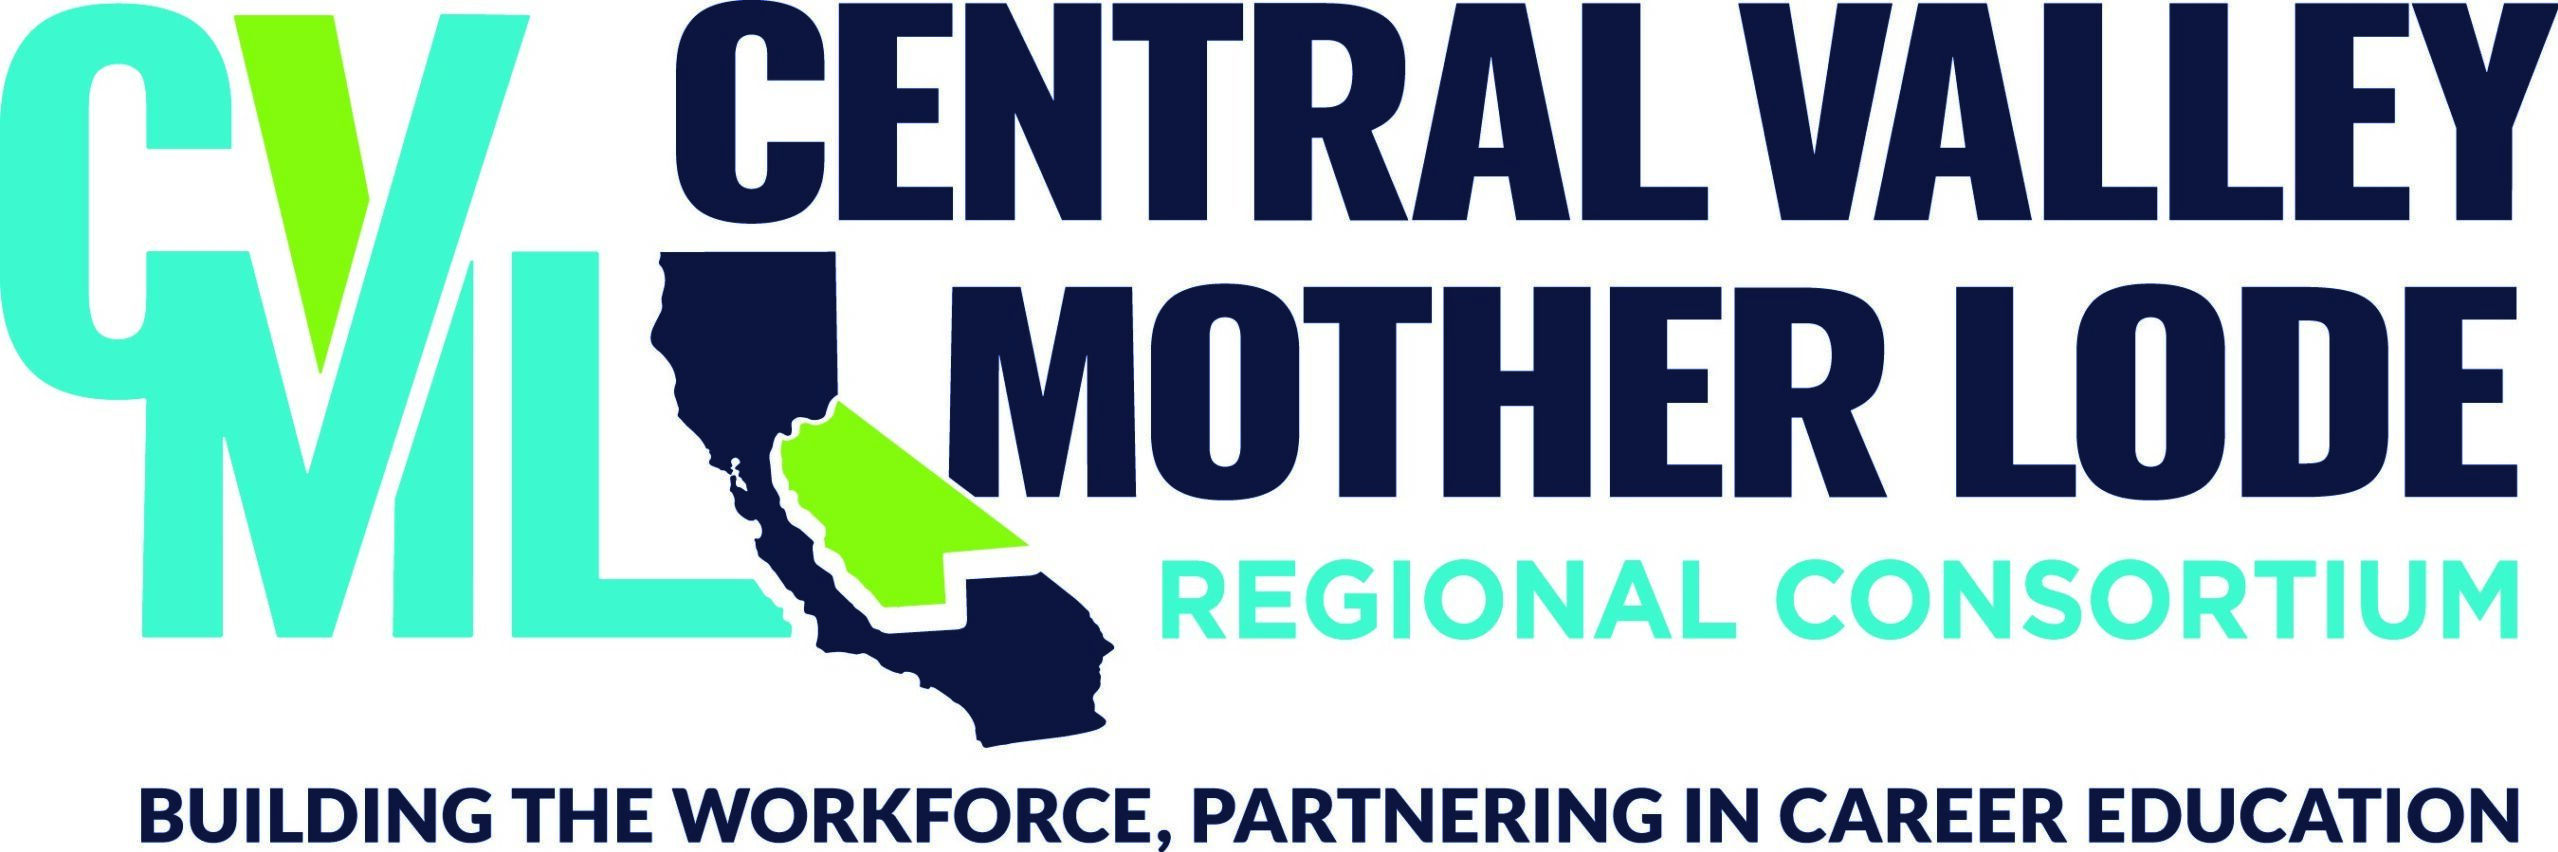 Central Valley Mother Lode Regional Consortium